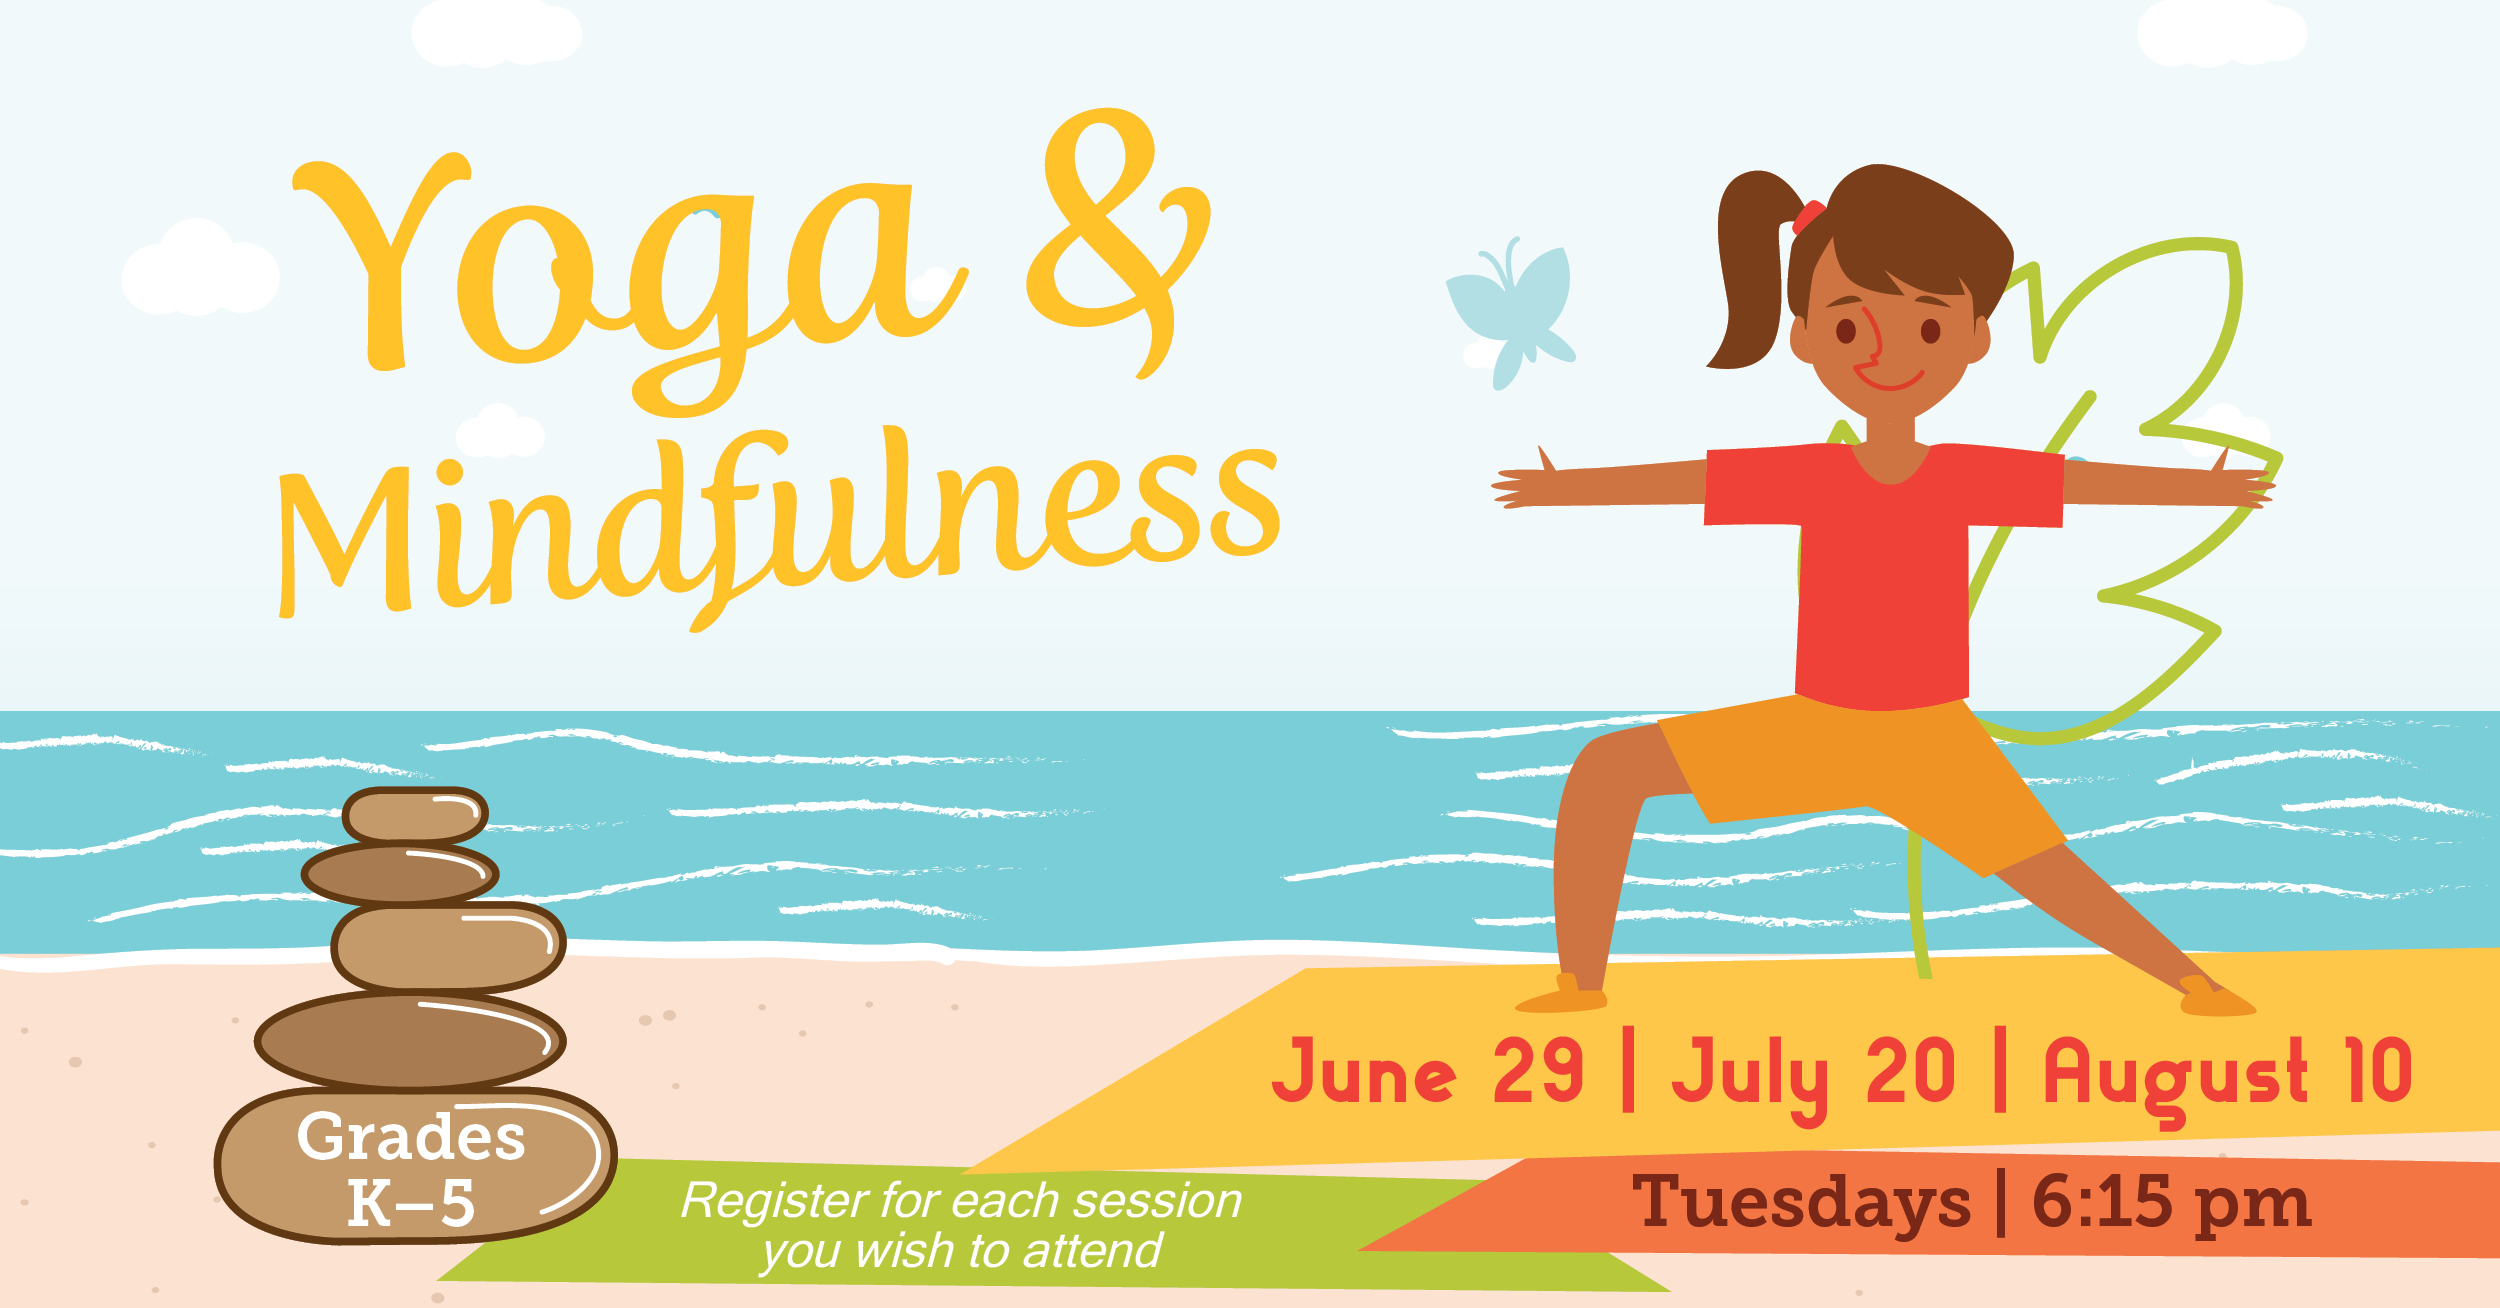 Yoga and Mindfullness. Grades k to give. Tuesdays at 6:15pm. June 29, July 20, August 10.